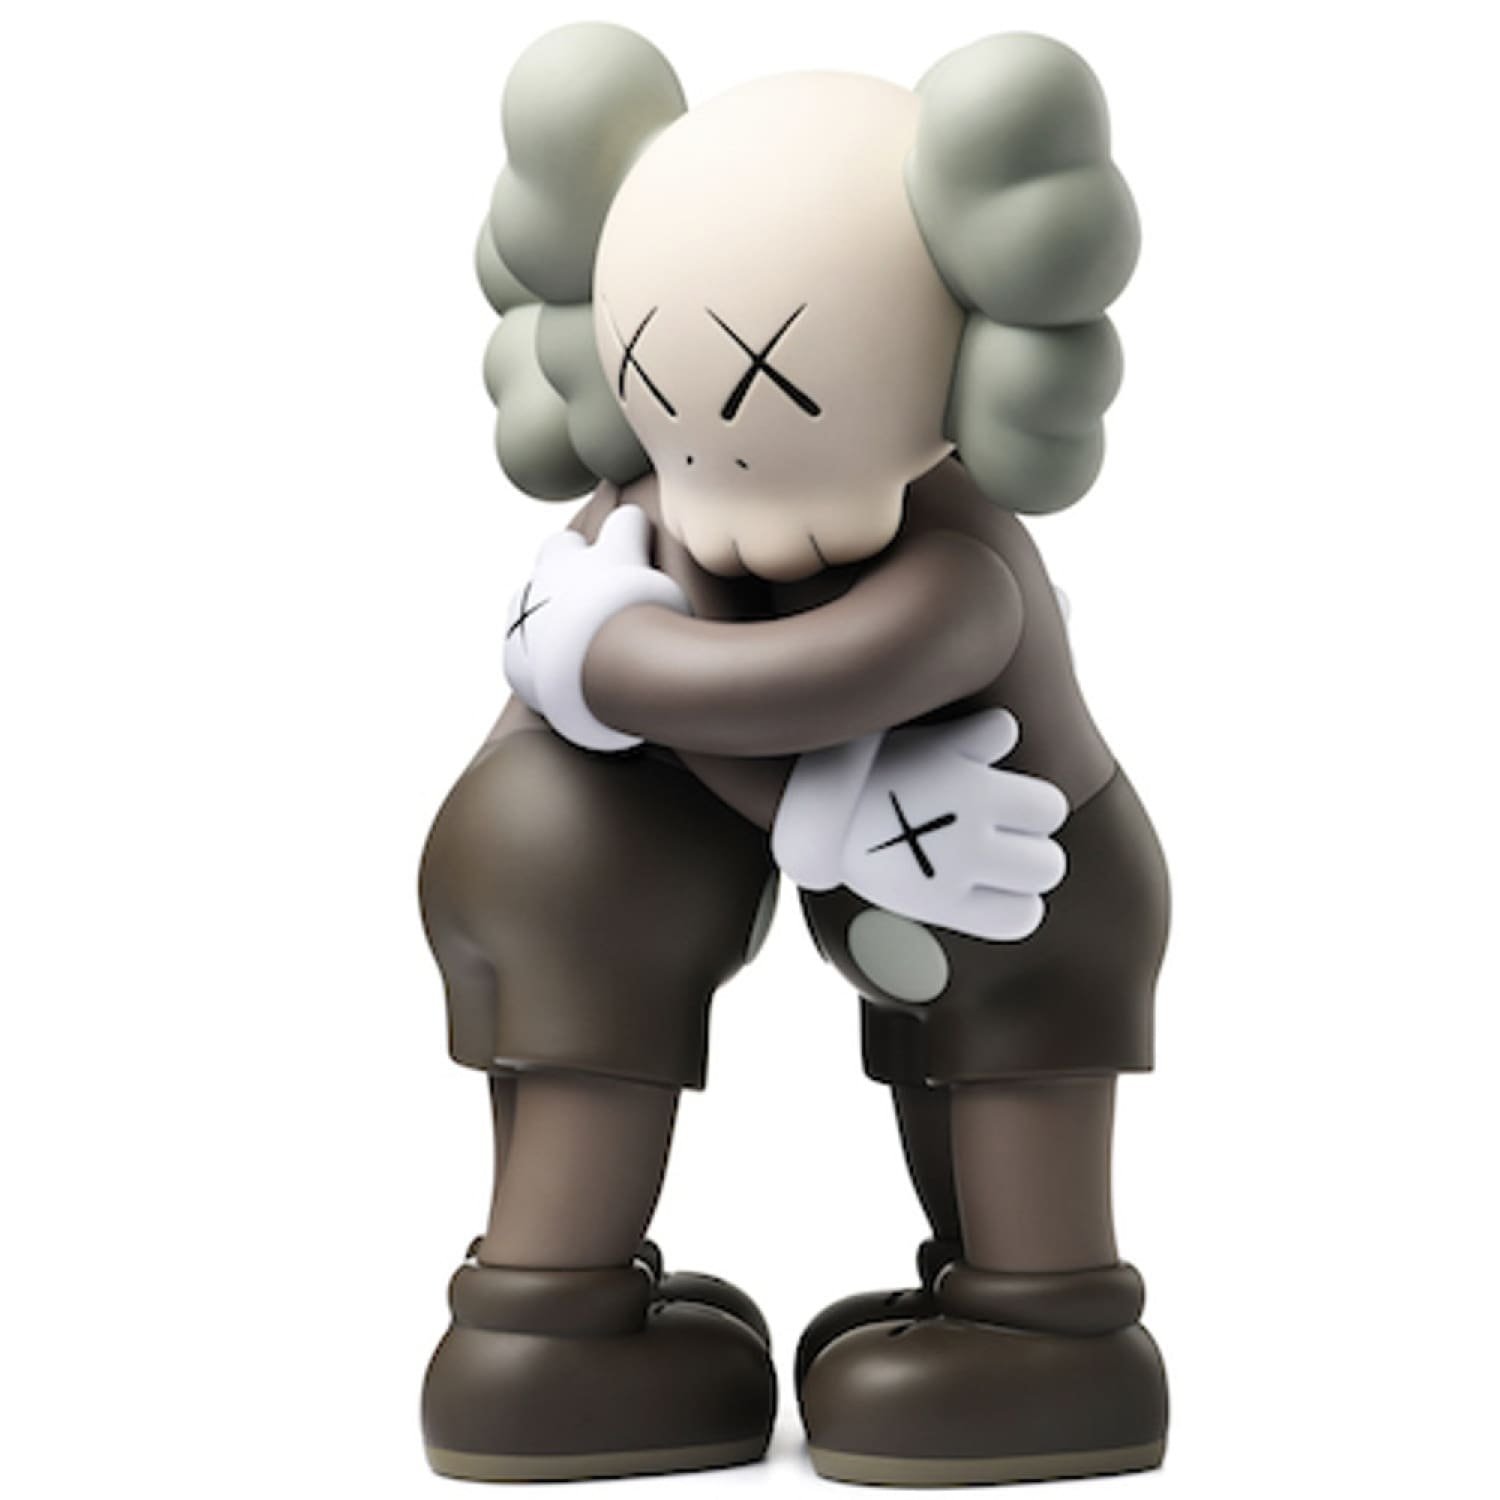 Together brown vinyl figure by Kaws from 2018 - Dope! Gallery